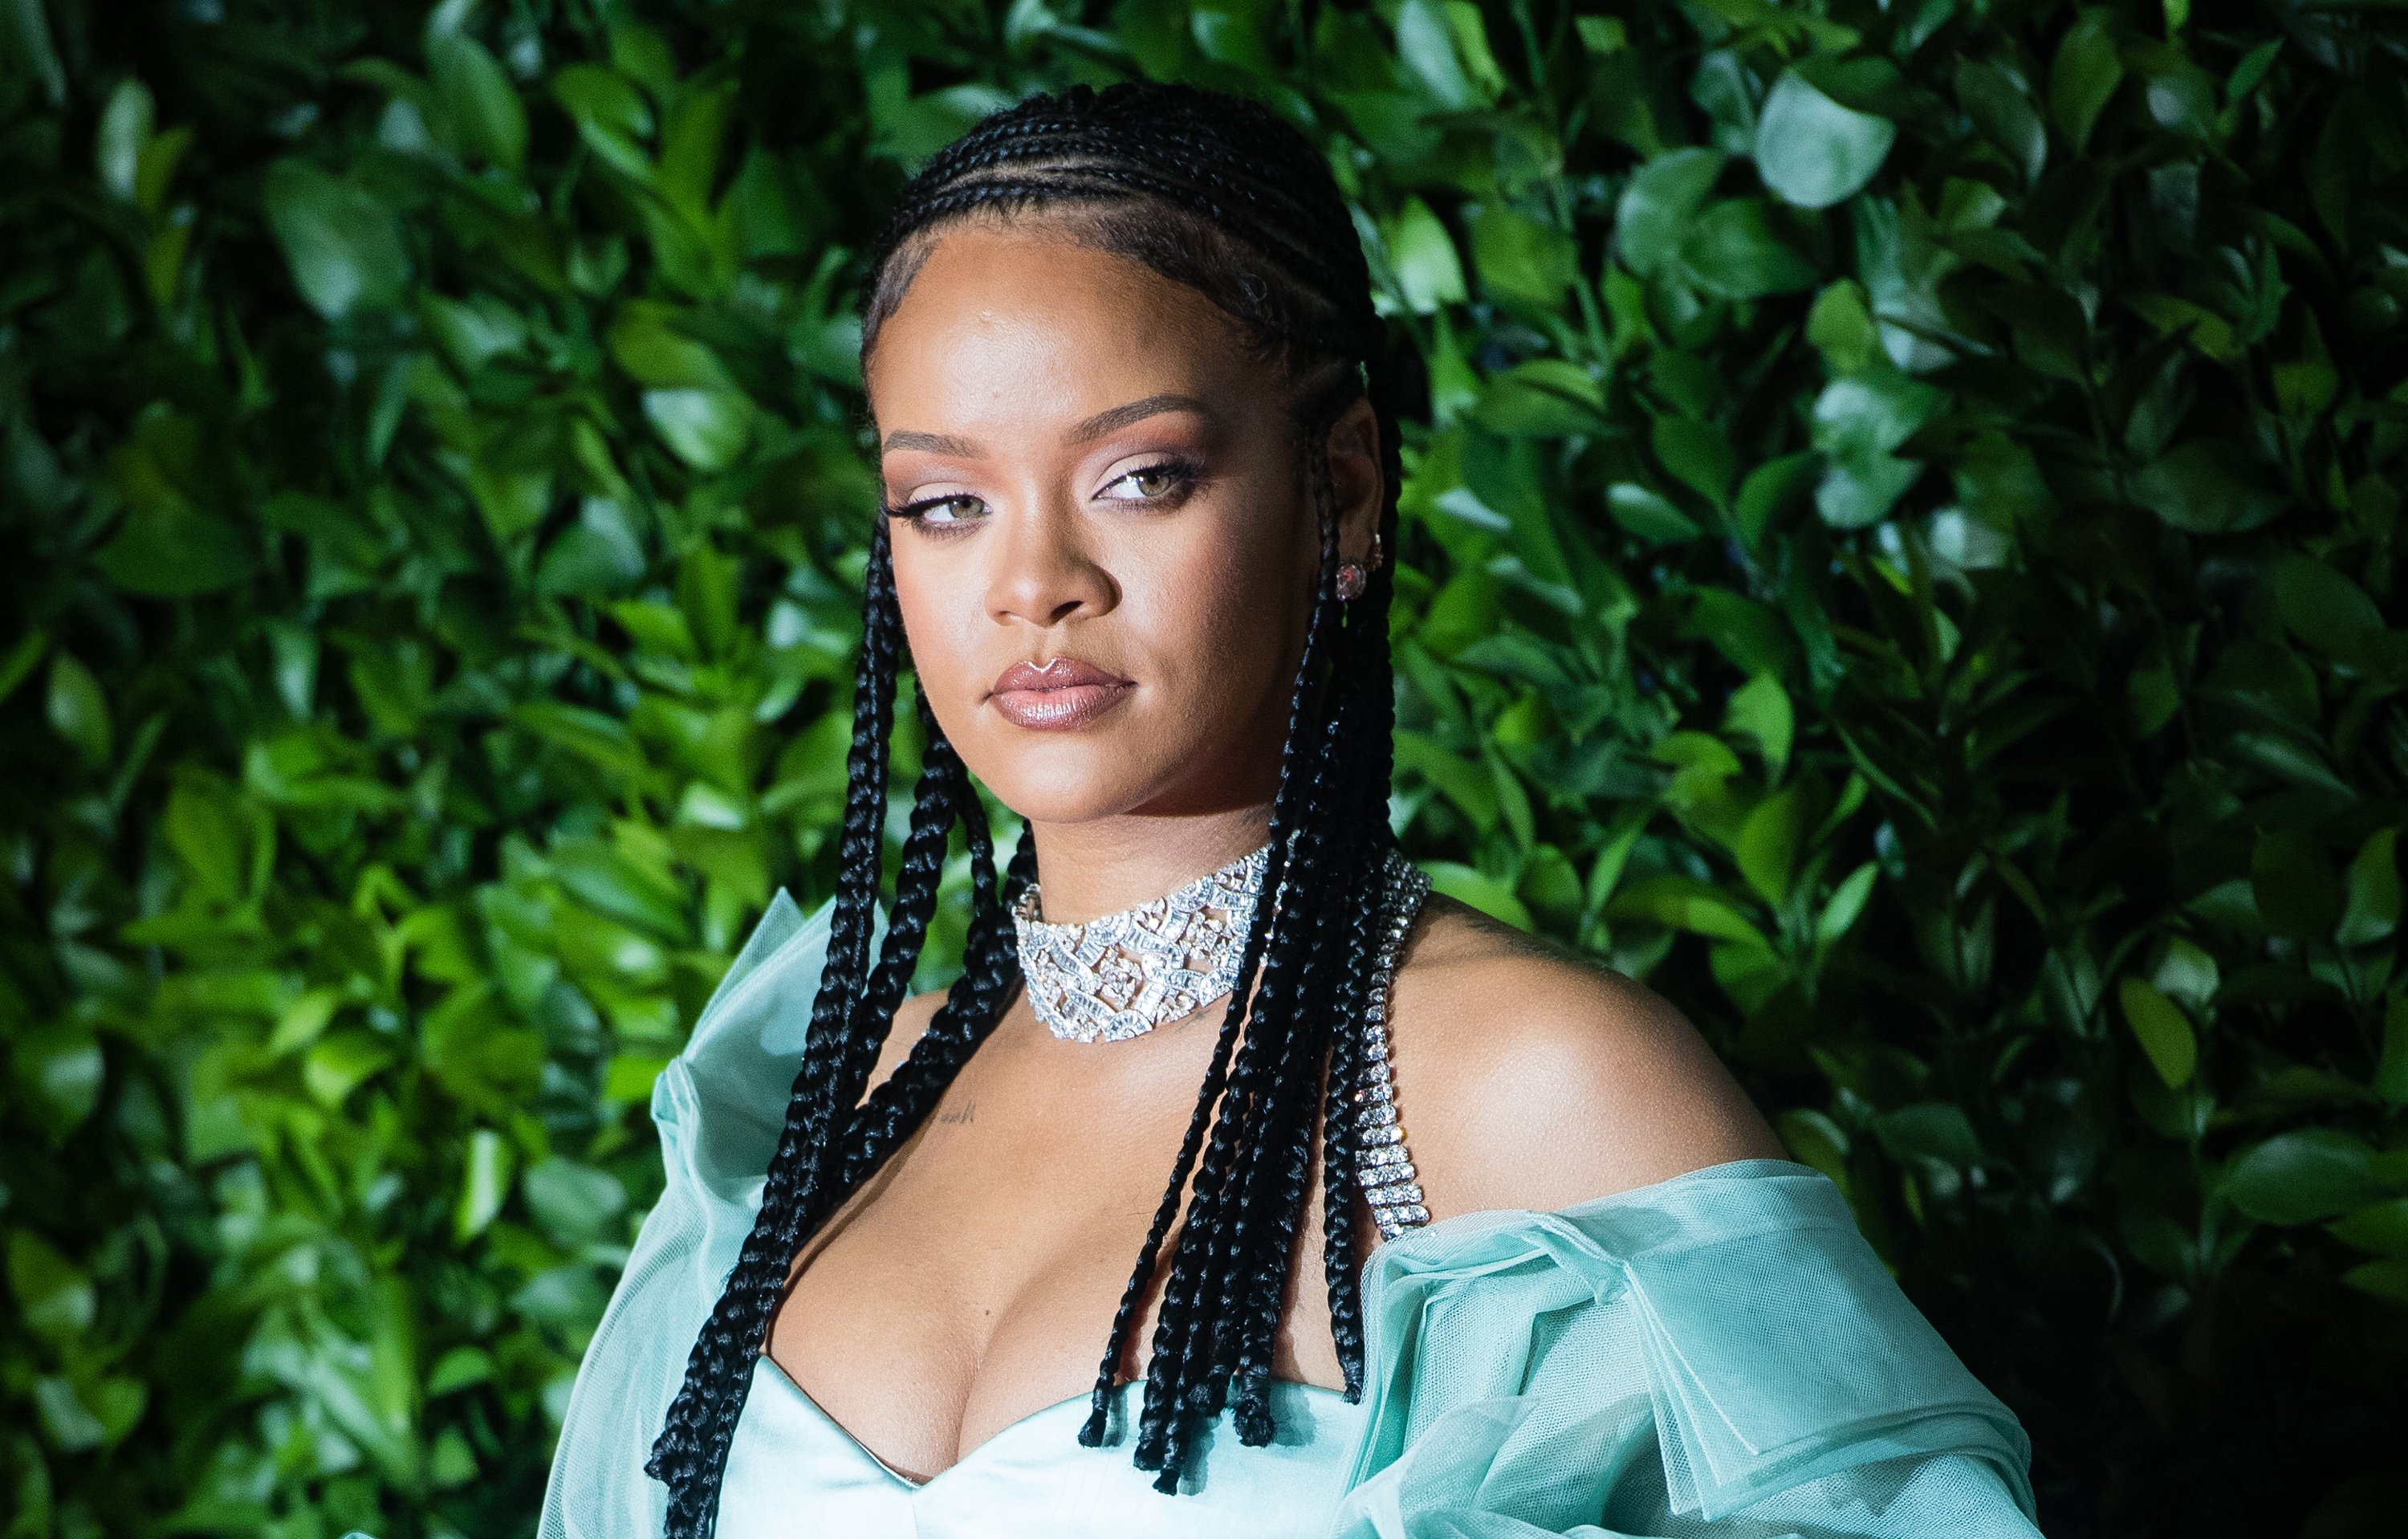 Rihanna in front of a green plant